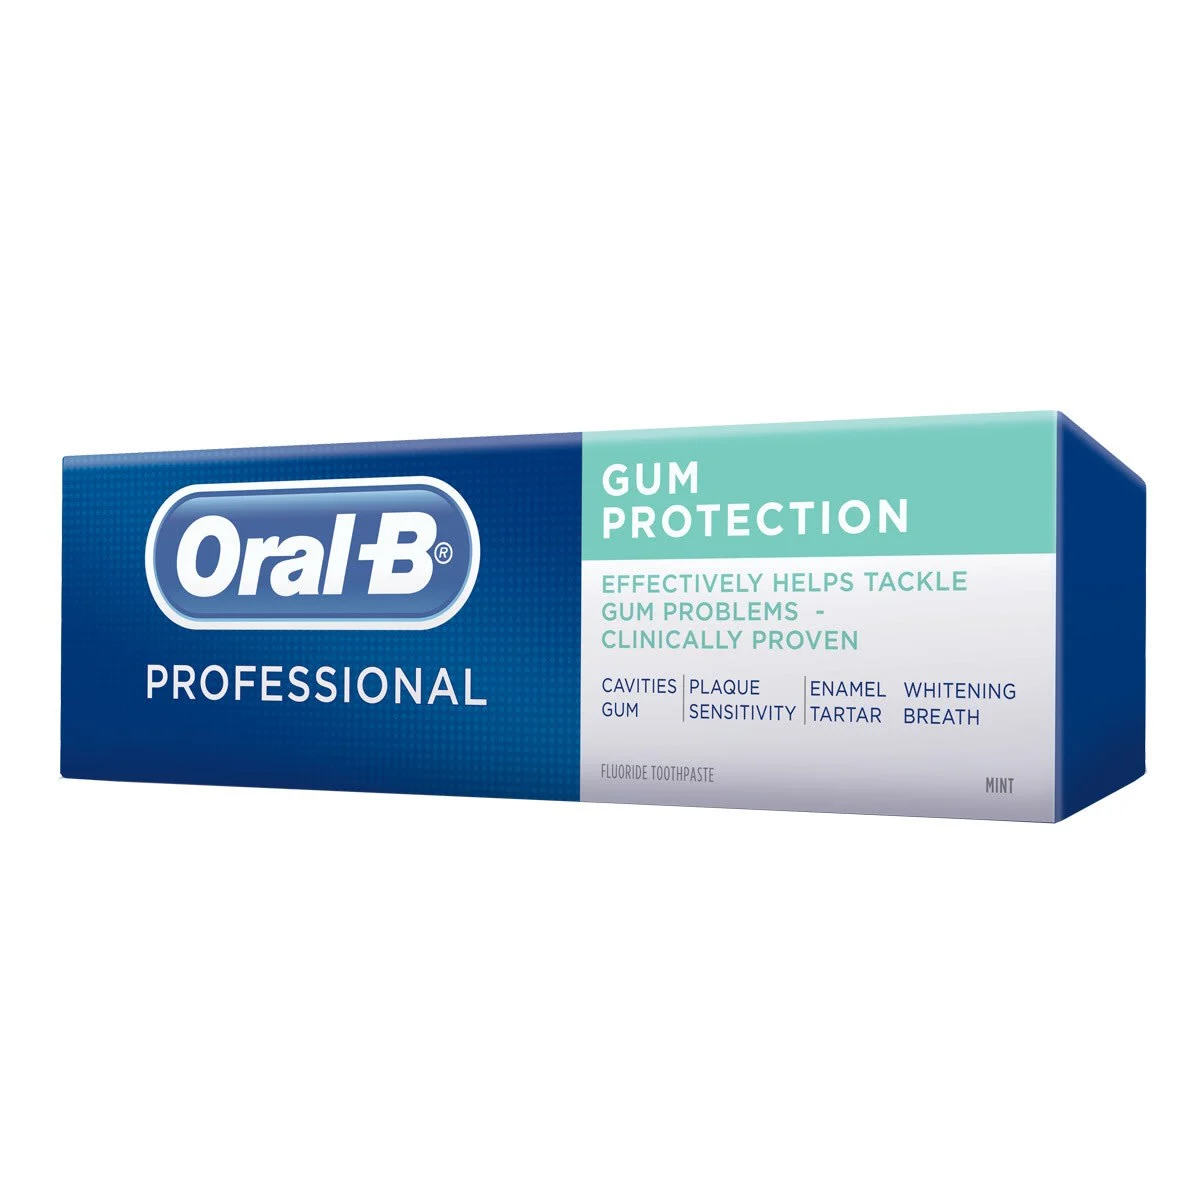 Oral-B Pro-Expert Professional Gum Protection toothpaste 